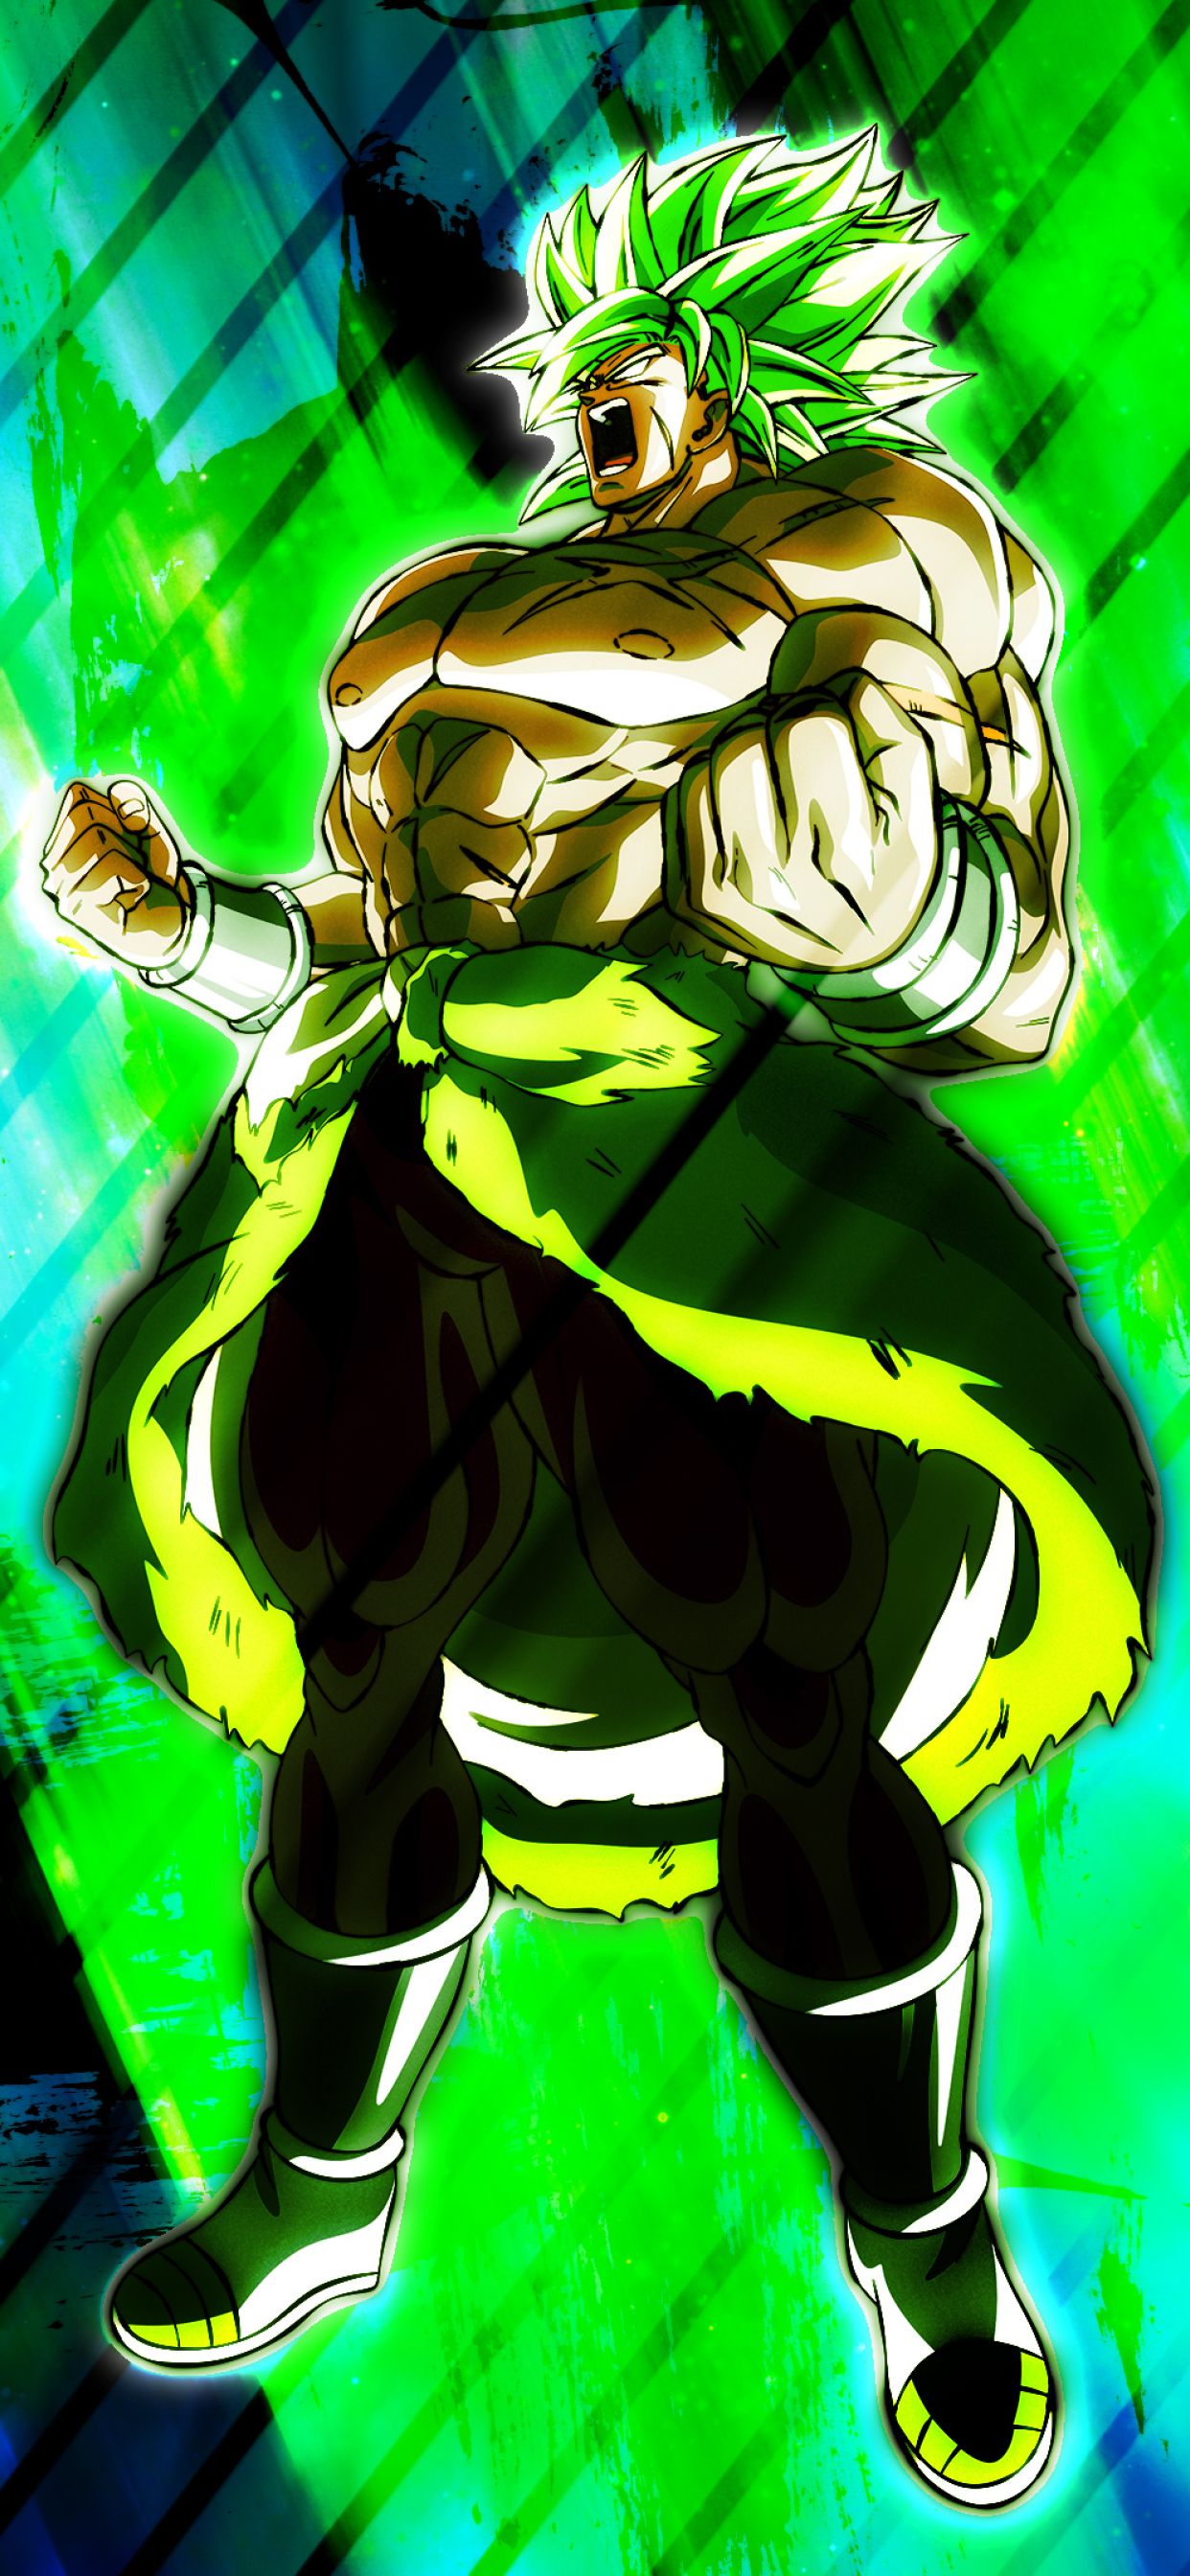 Unstoppable Broly 4K iPhone XS MAX Wallpaper, HD Anime 4K Wallpaper, Image, Photo and Background